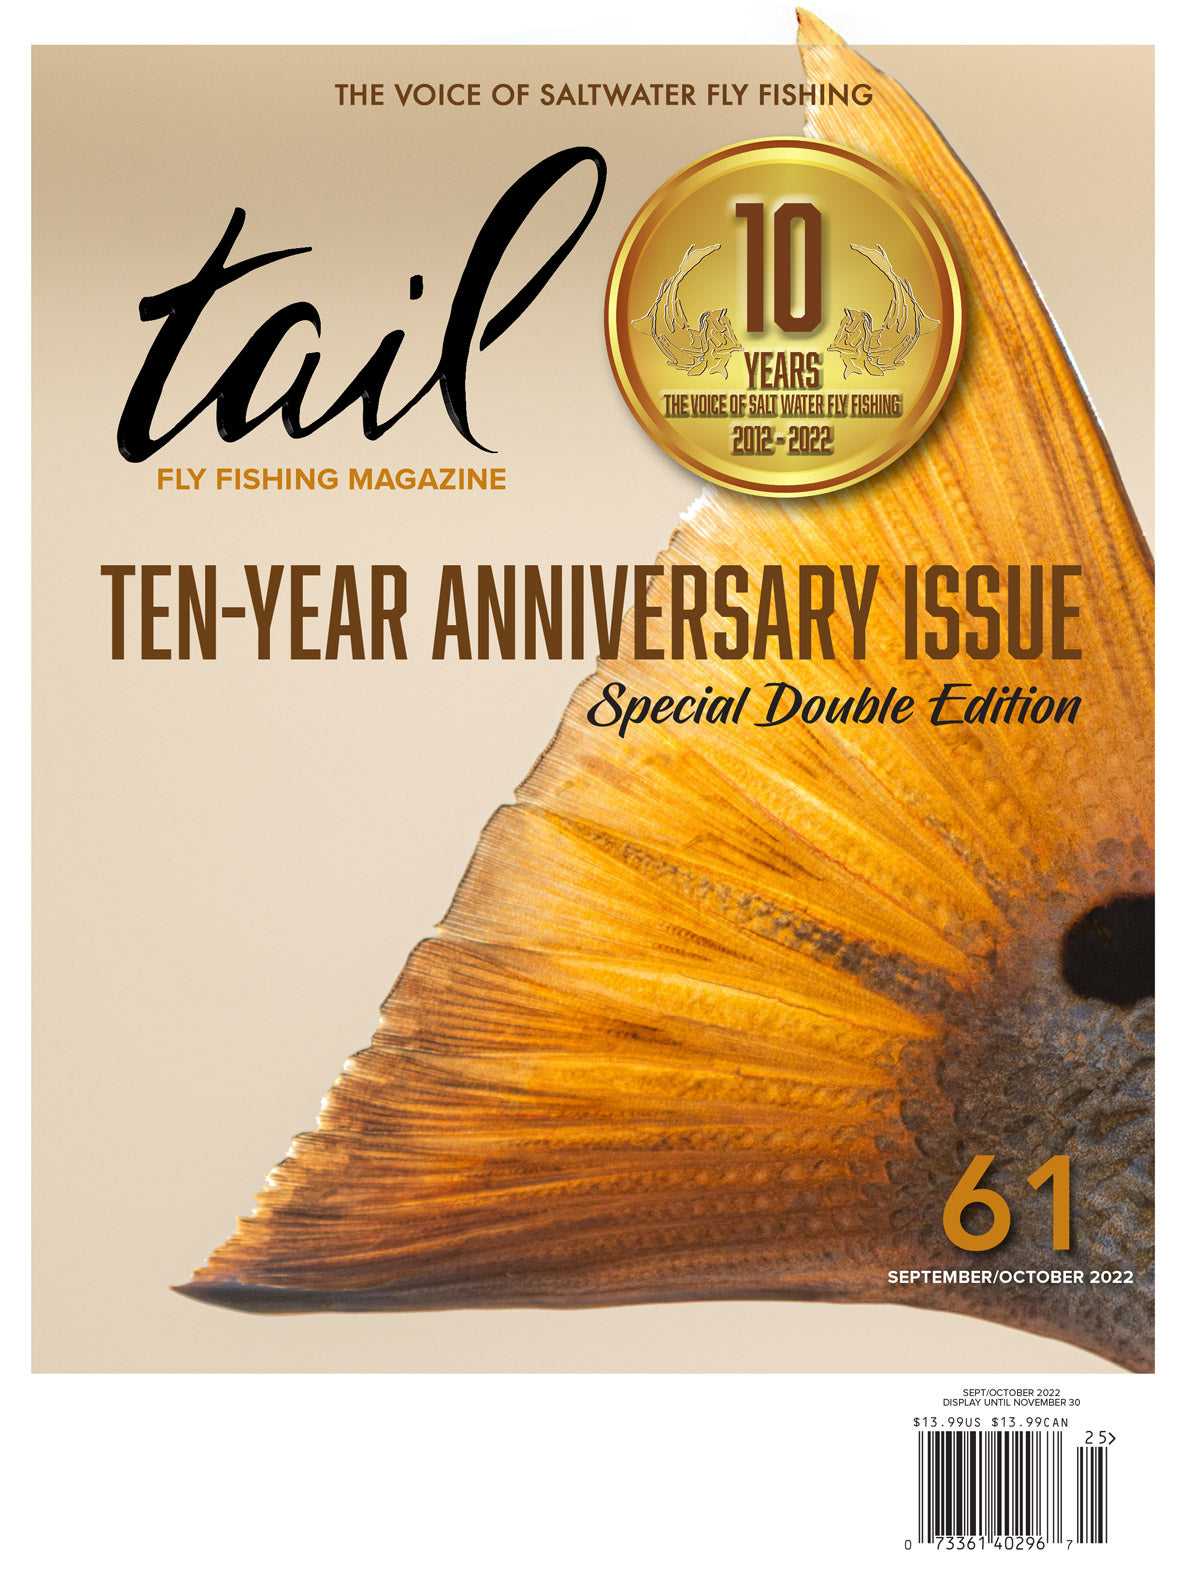 The 10-Year Anniversary Issue of Tail Fly Fishing Magazine 2012-2022 Issue #61 - Tail Magazine Fly Shop